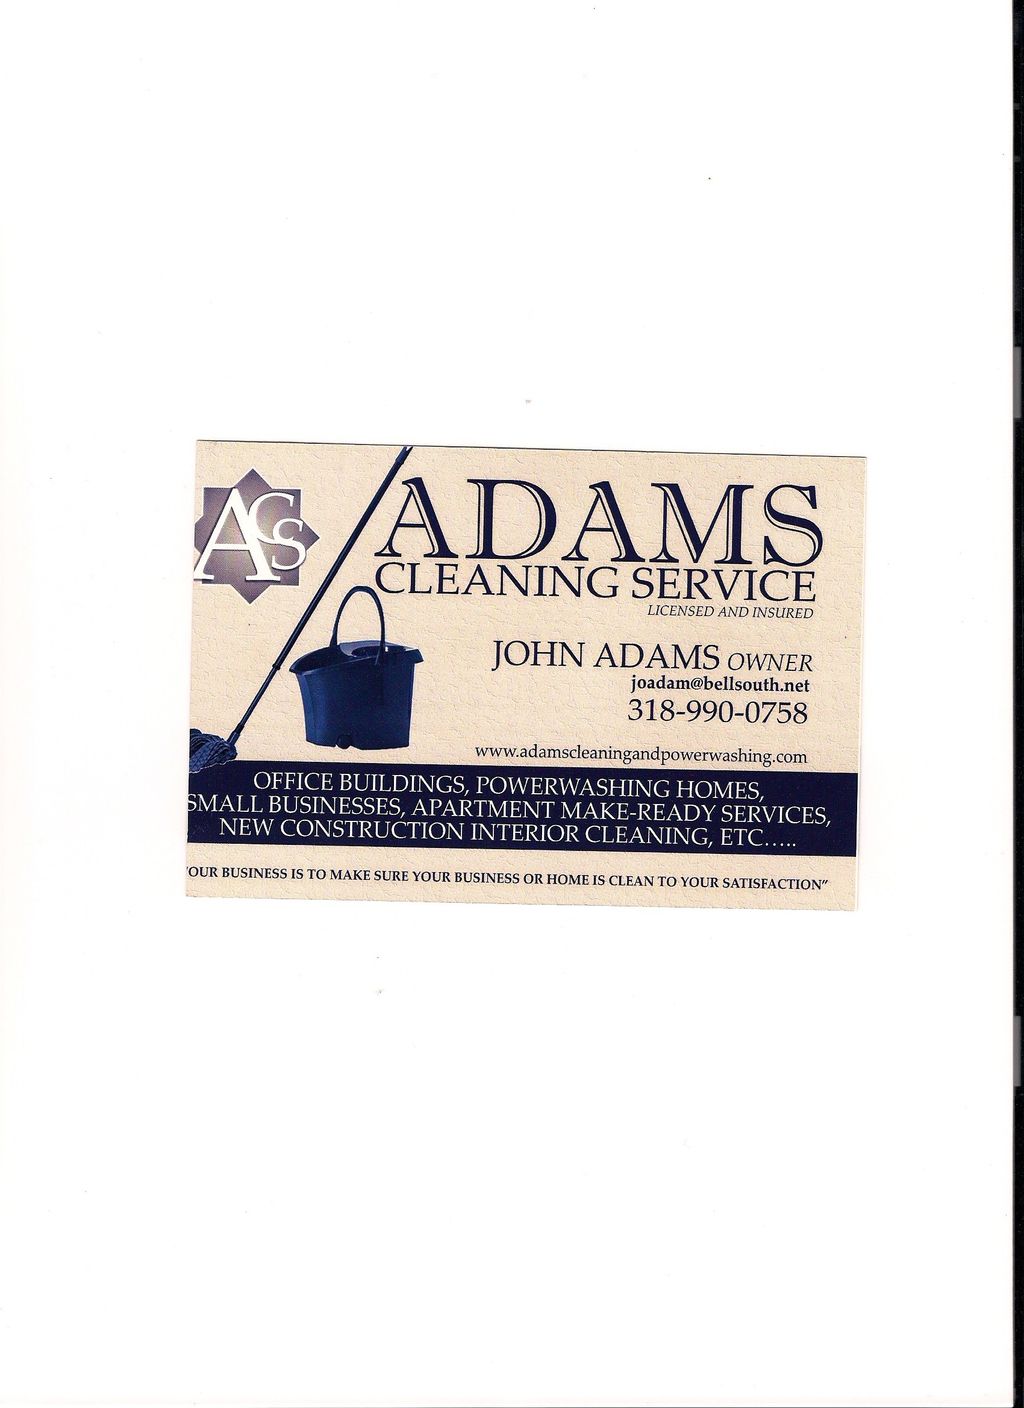 Adams Cleaning Service